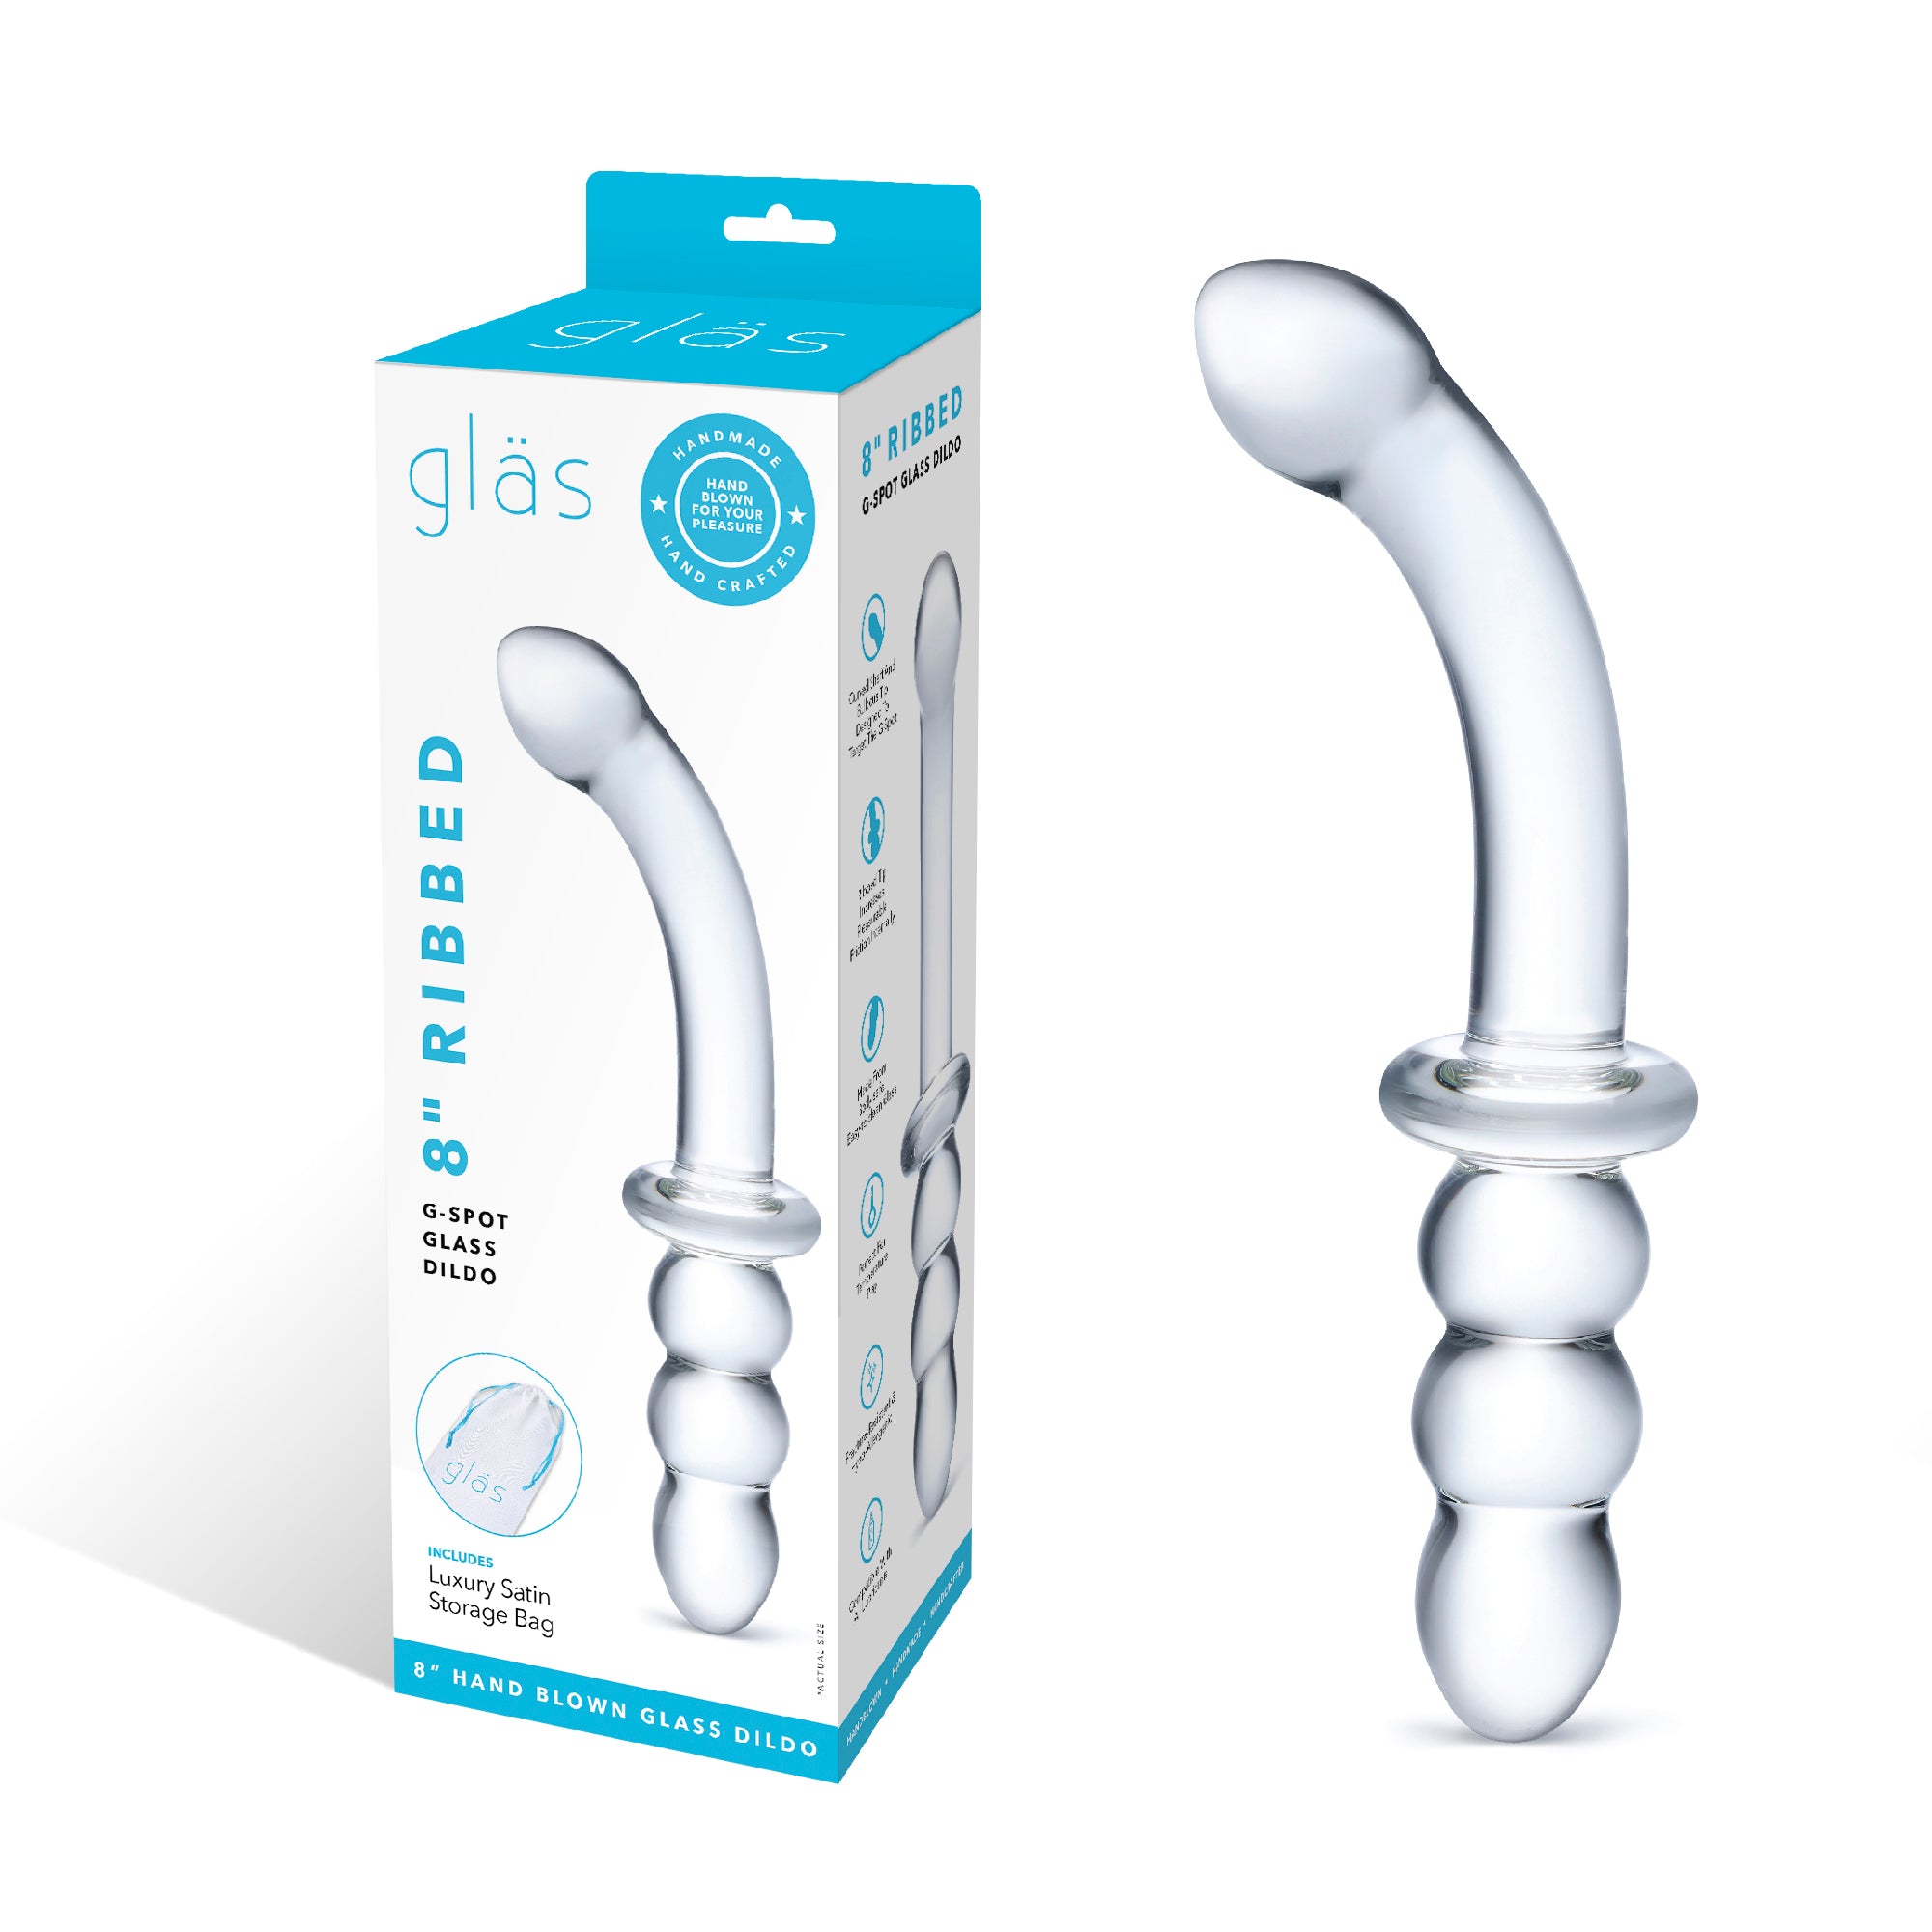 Packaging of the Gläs 8 inch Ribbed G-Spot Glass Dildo